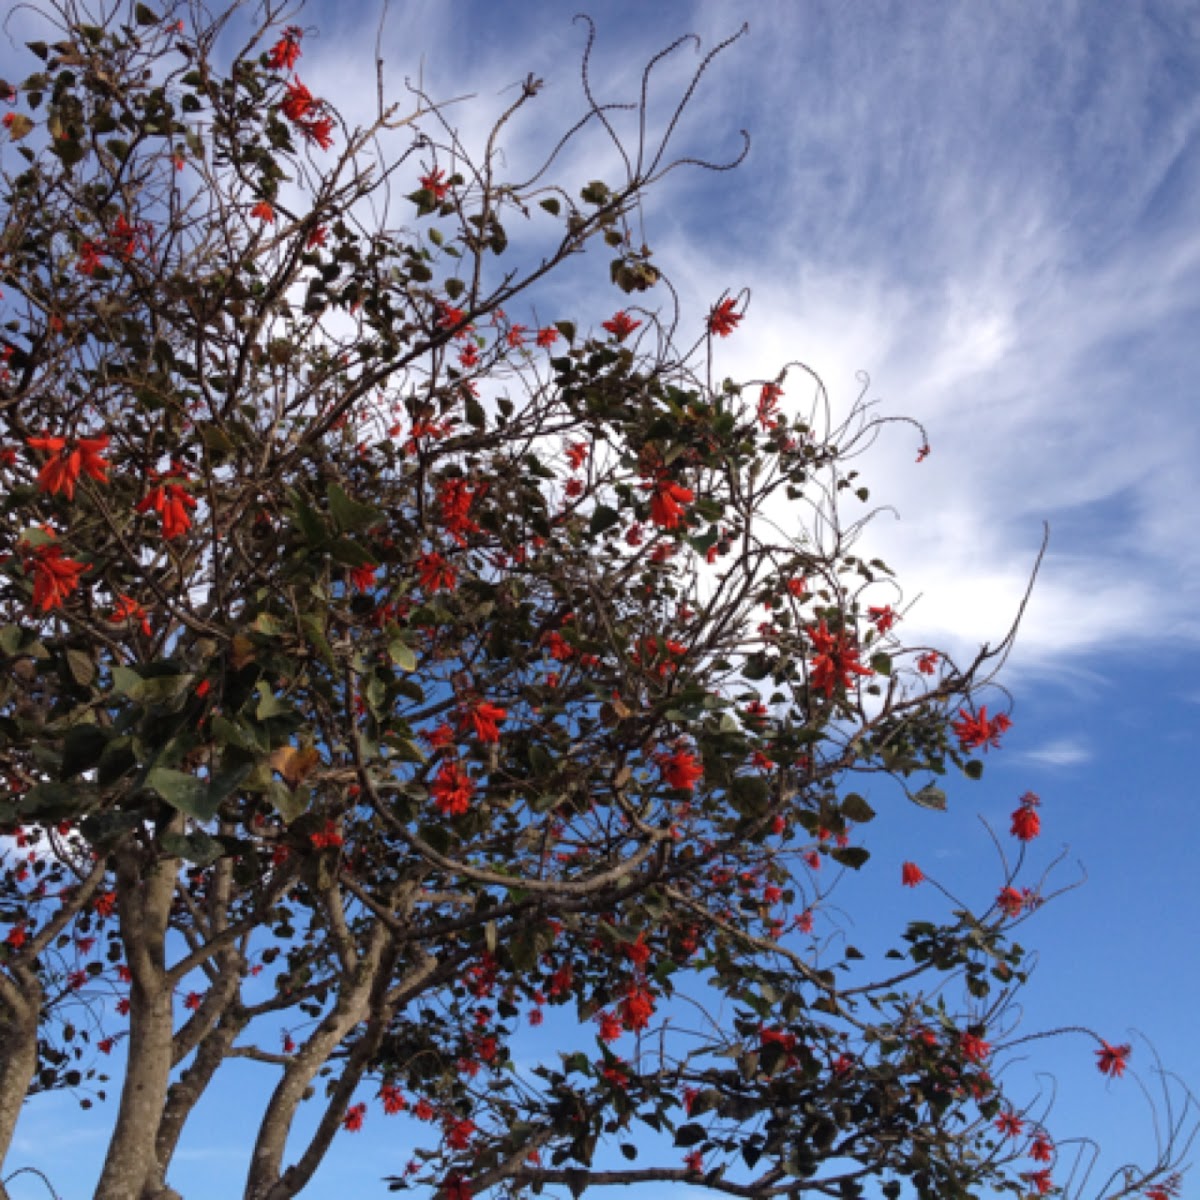 Coral tree